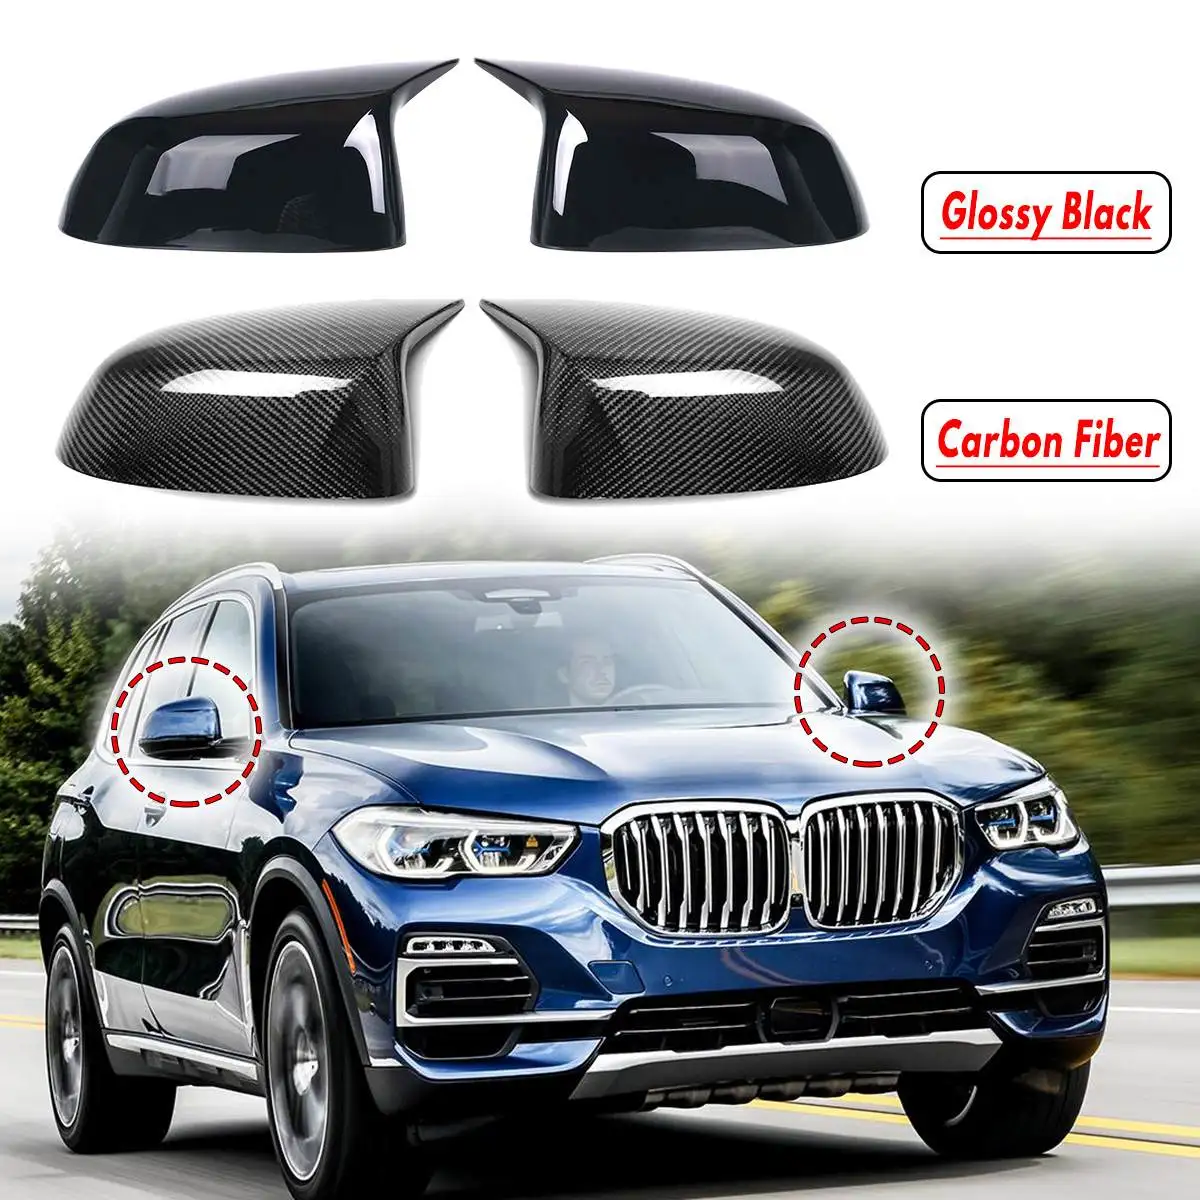 

1 Pair Horn Shape Glossy Black / Carbon fiber Rearview Replacement Side Mirror Covers For BMW X3 G01 X4 G02 X5 G05 X6 G06 2018